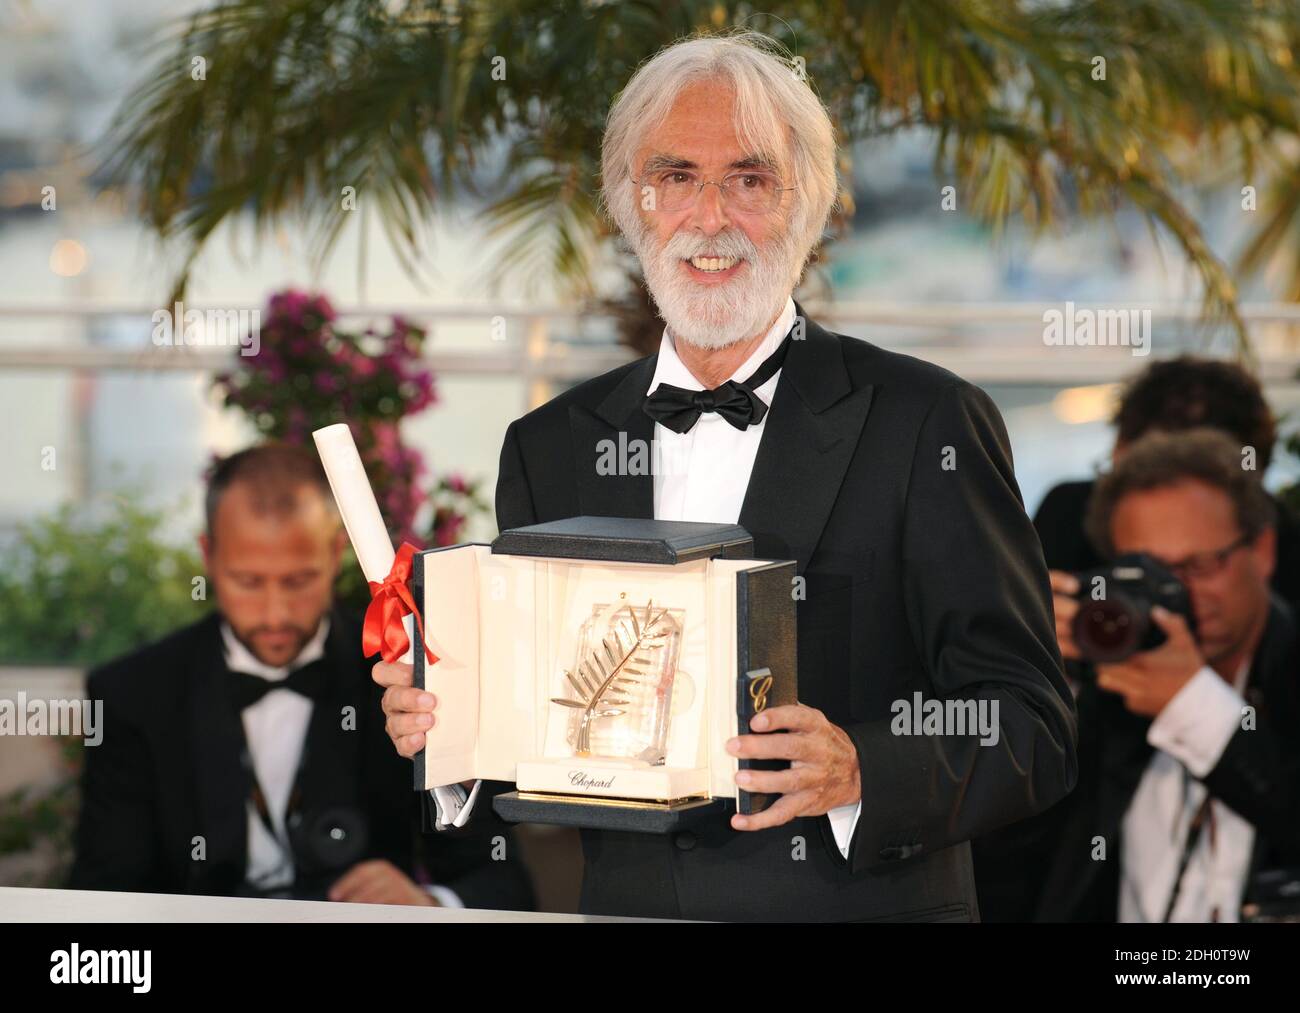 Austrian director Michael Haneke posing with the Palme d'Or award he received for the film 'The White Ribbon', at a photo call following the awards ceremony, during the 62nd International film festival in Cannes, southern France, Sunday, May 24, 2009. Stock Photo